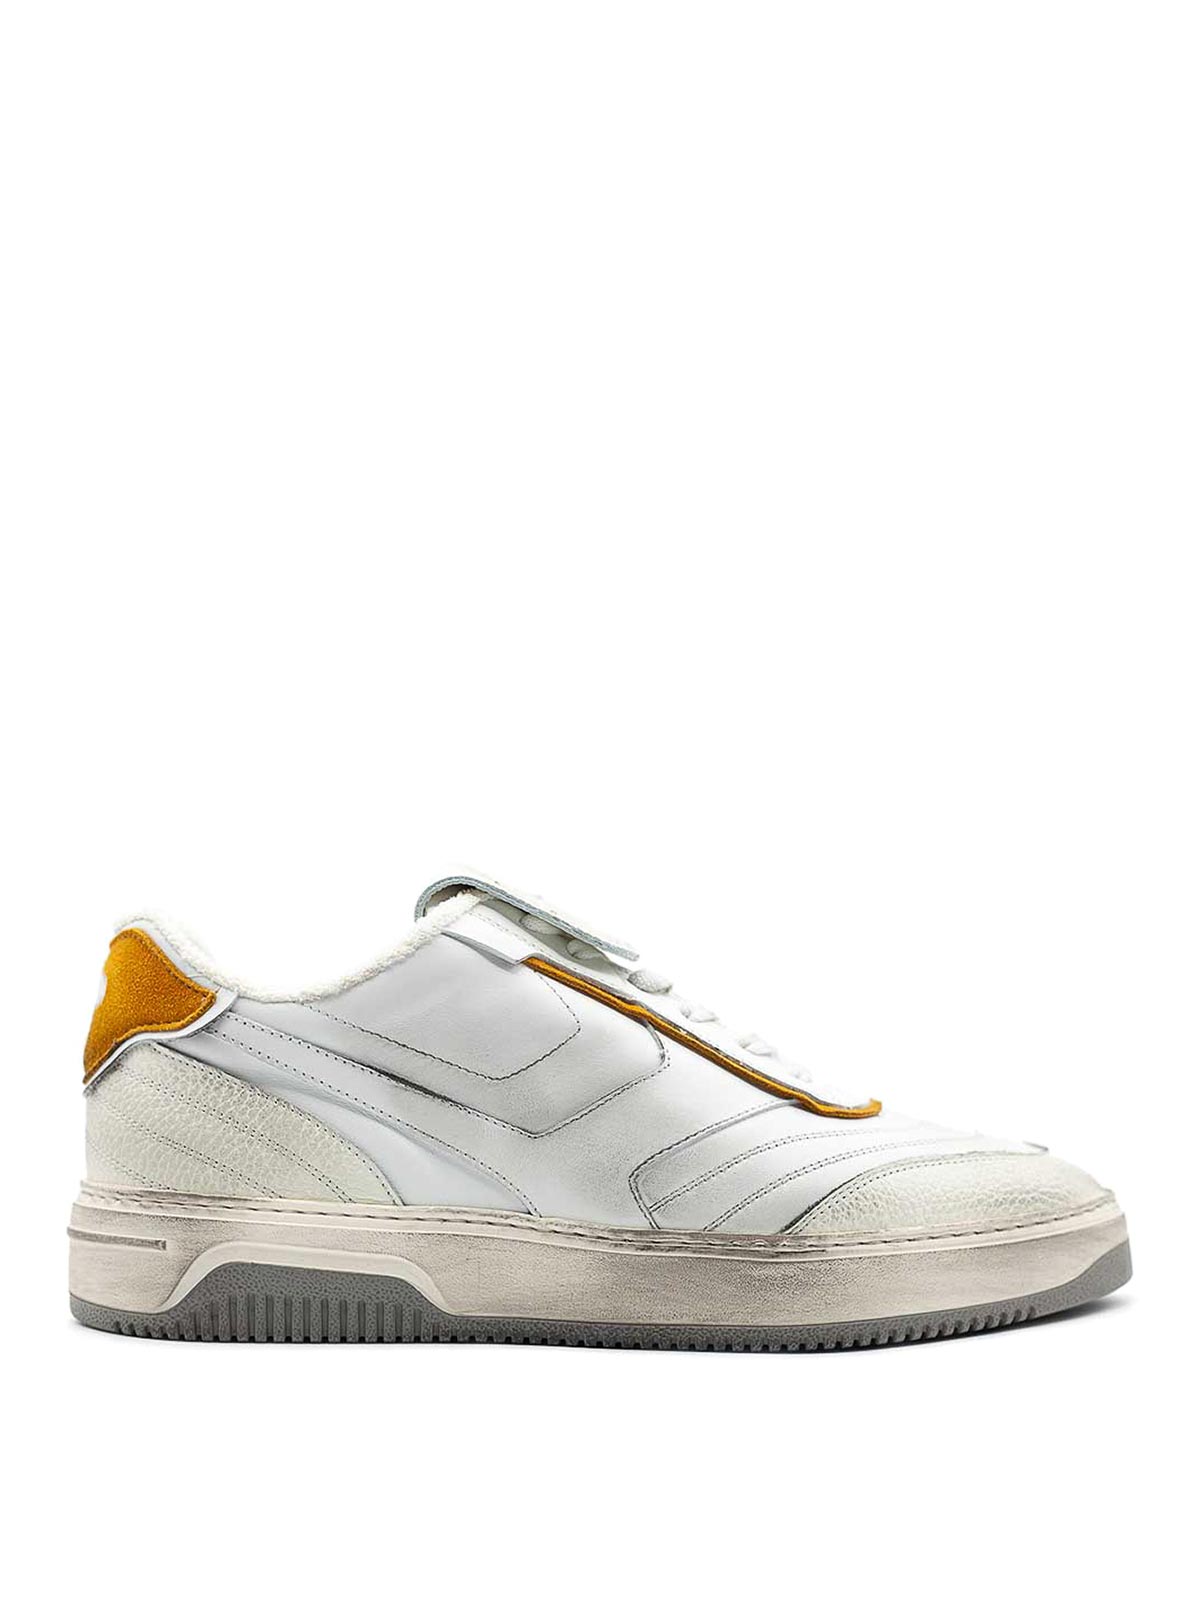 Pantofola D'oro 135 Trainers In White